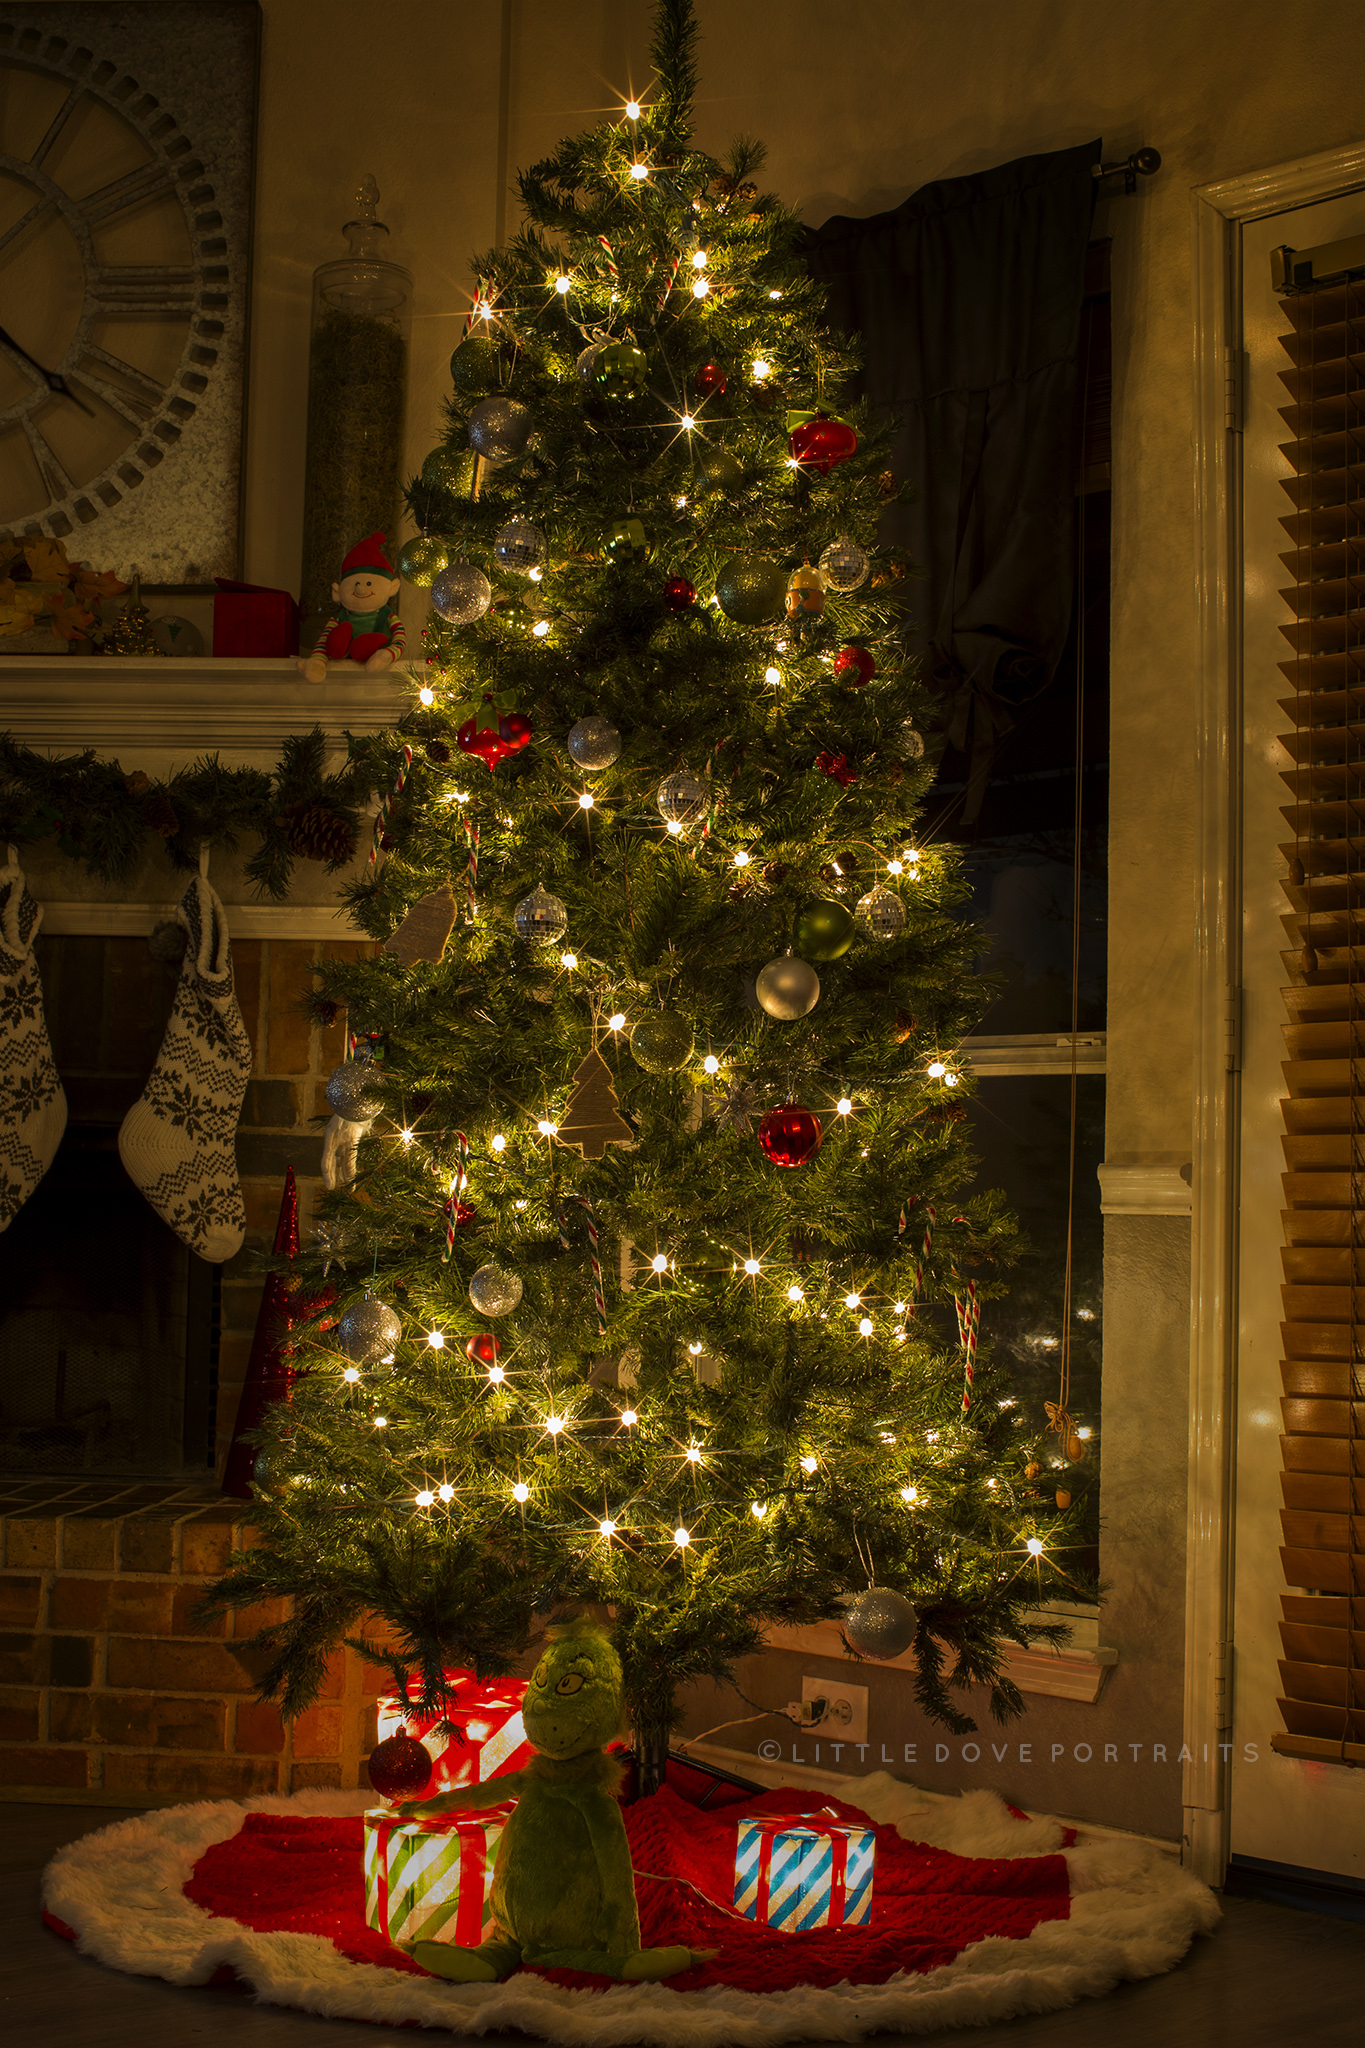 How to photograph your Christmas Tree | Dallas family photographer